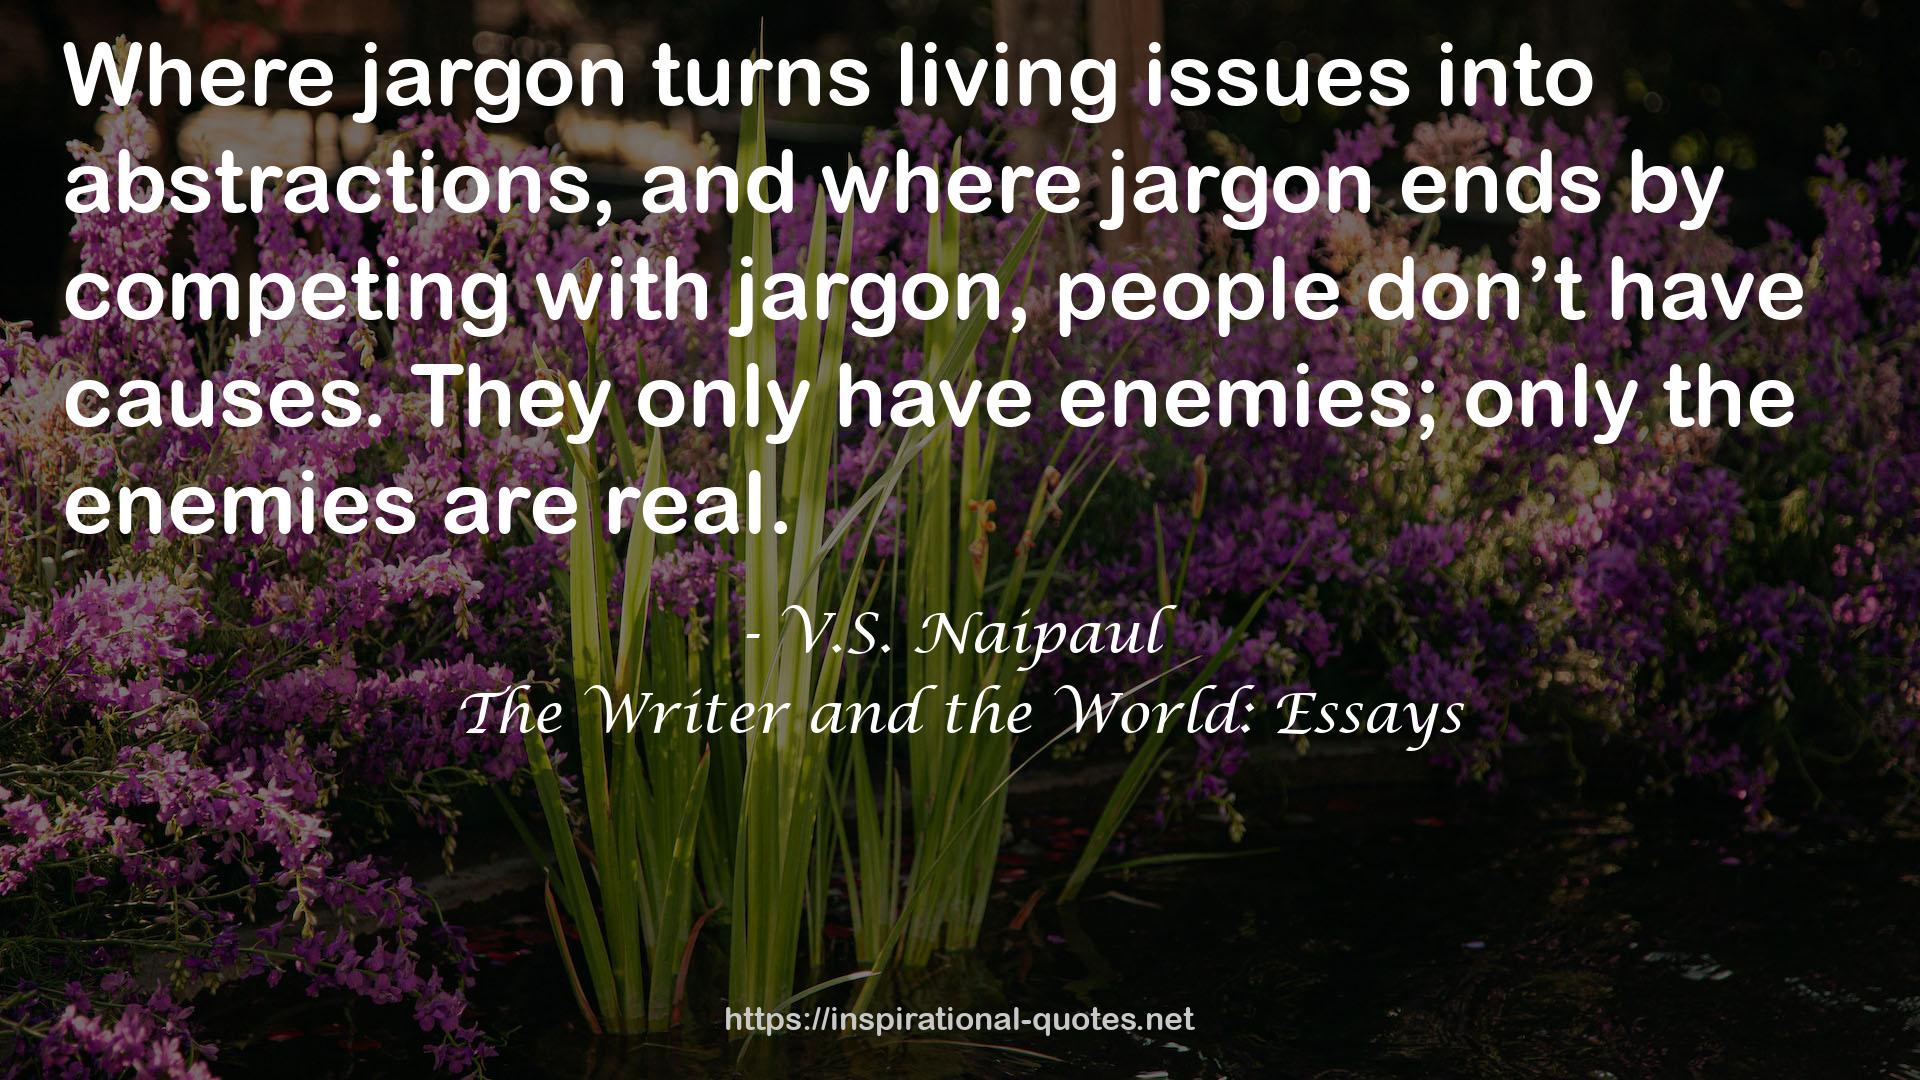 The Writer and the World: Essays QUOTES